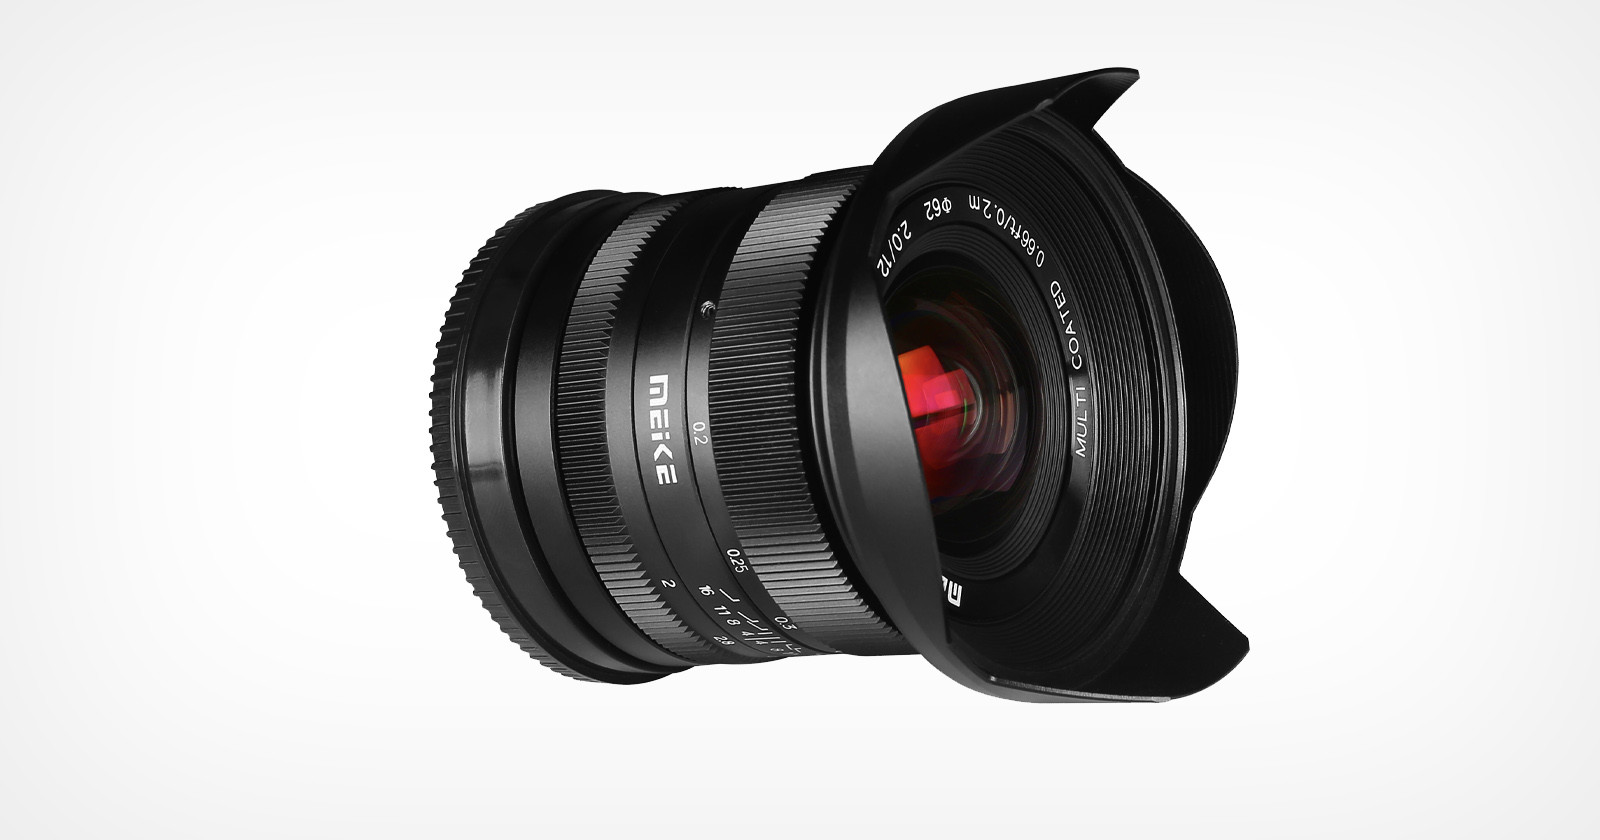 Meikes New 12mm f/2 APS-C Lens is Available for Five Mounts